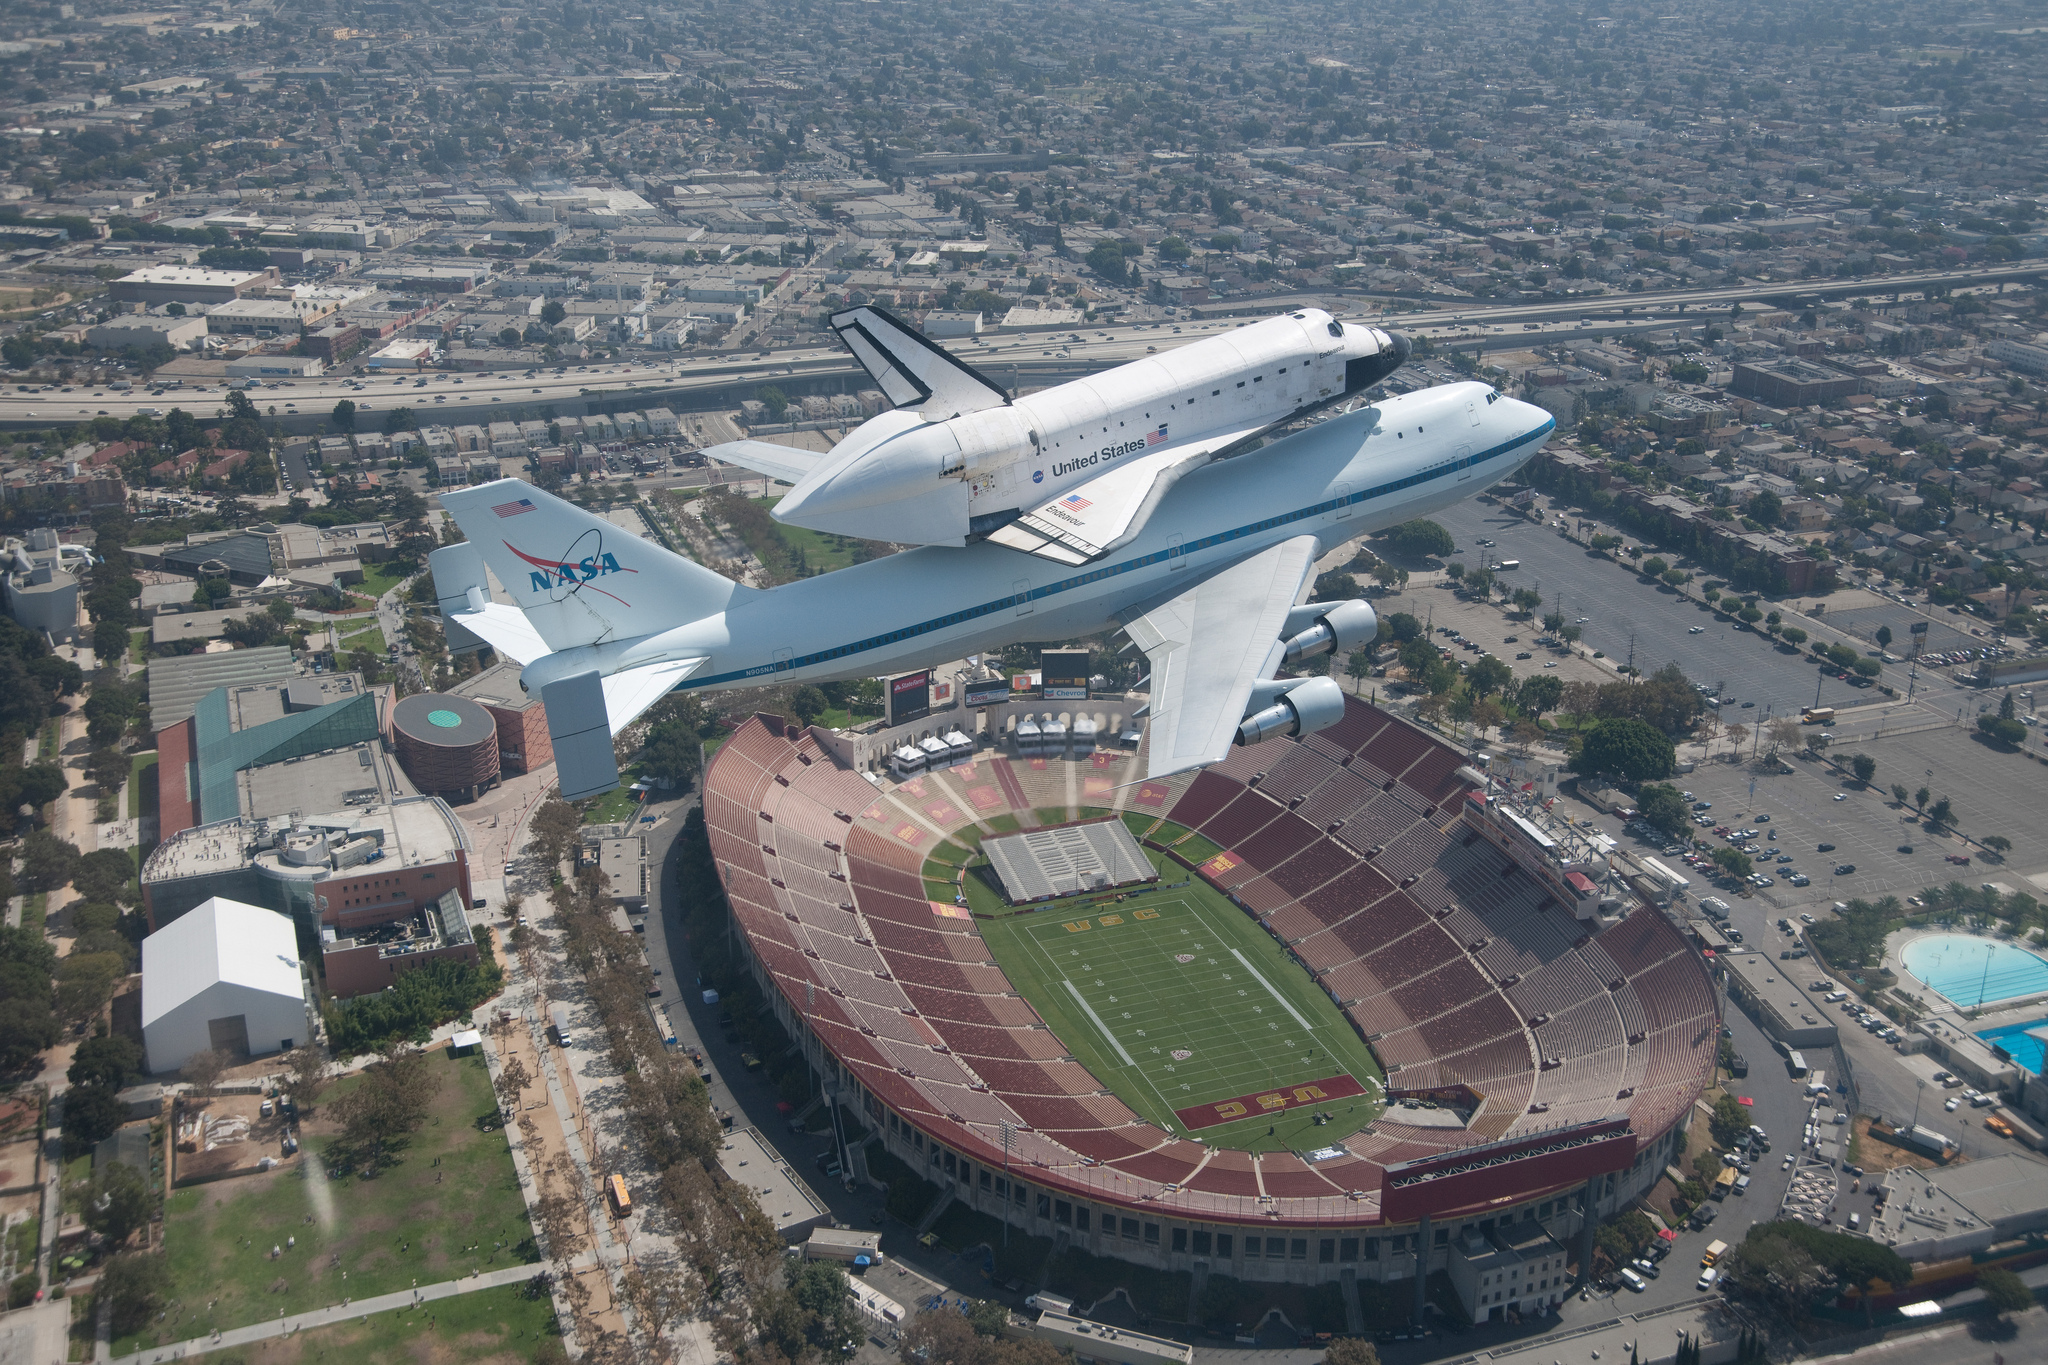 android vehicles, space shuttle endeavour, airplane, los angeles, nasa, shuttle, space shuttle, stadium, space shuttles